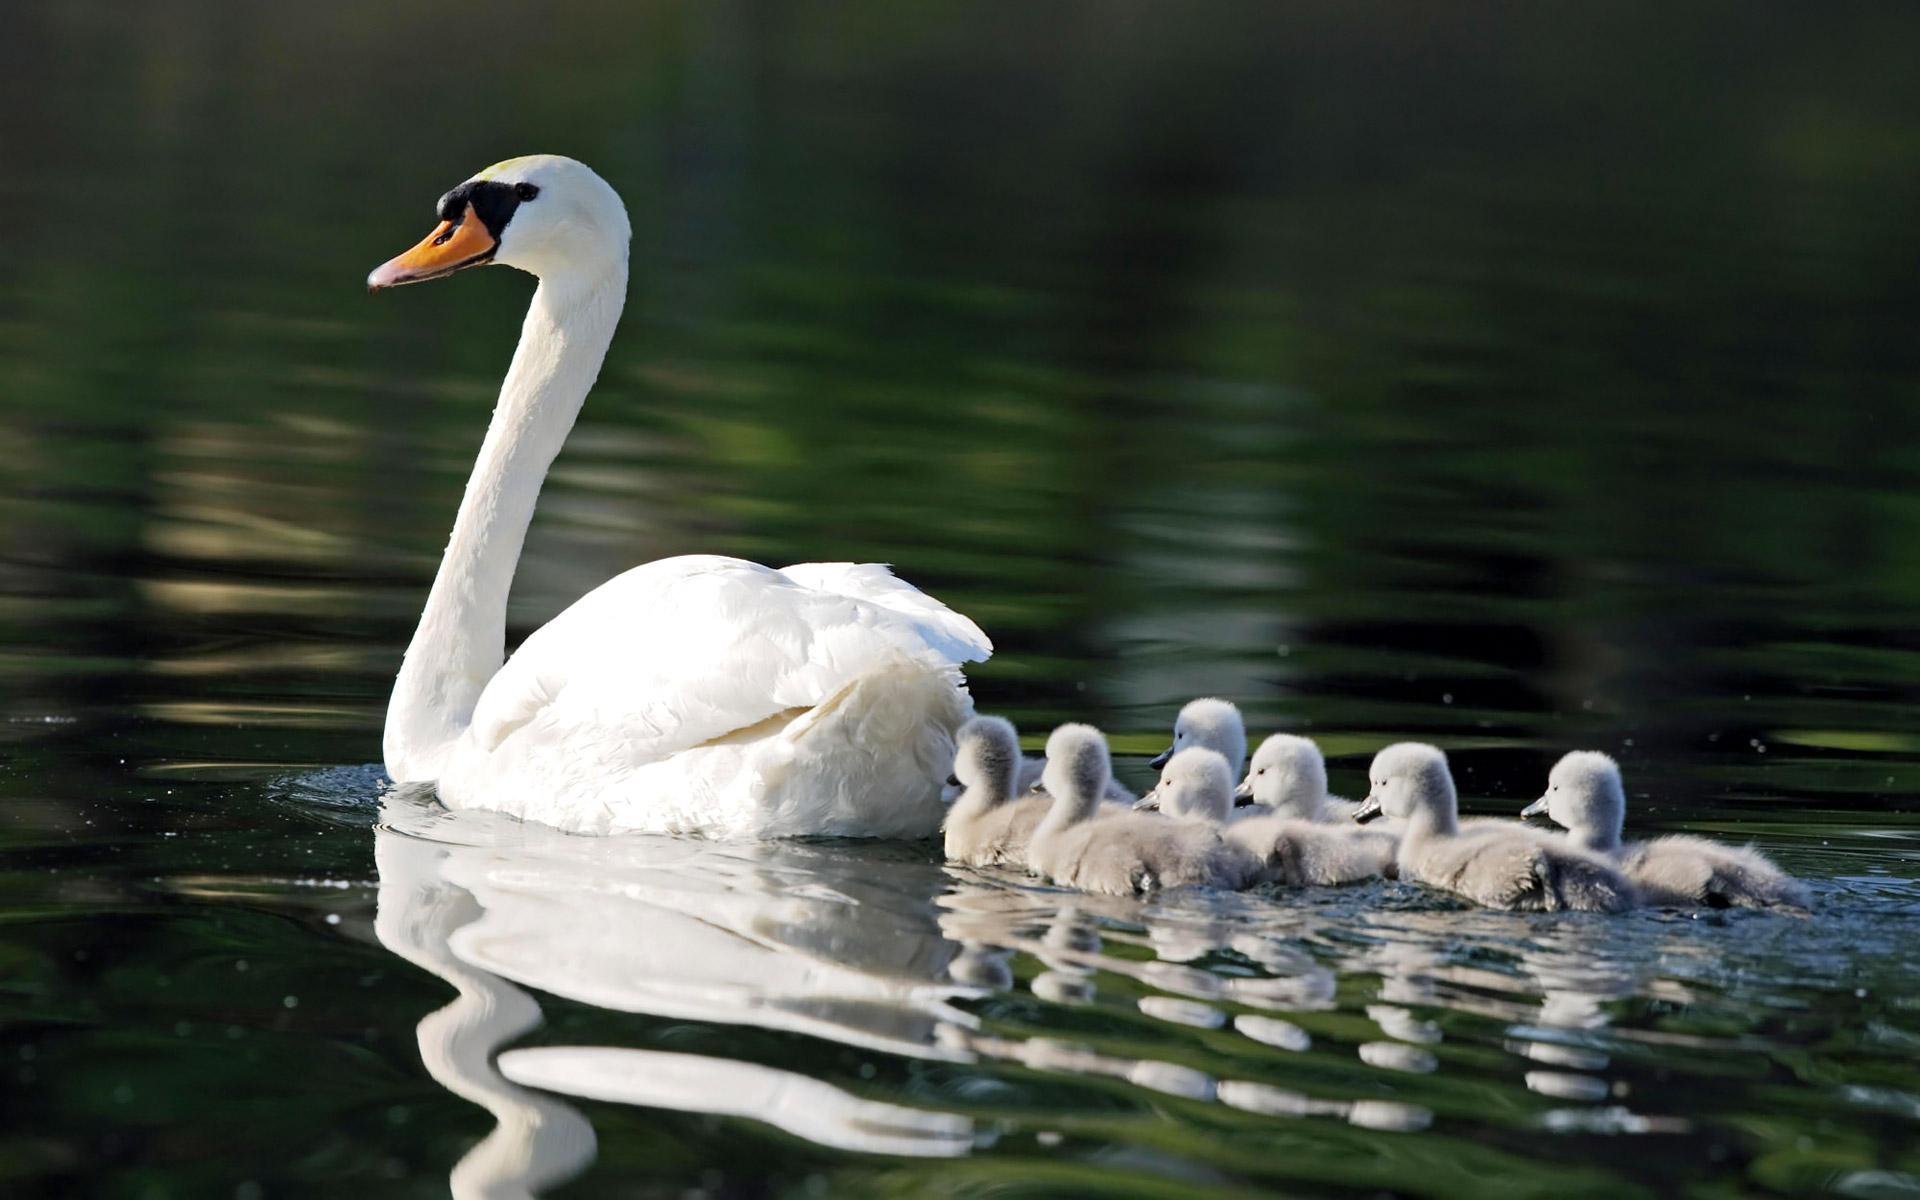 After the death of the mother, Father Swan stepped up to care for baby swans